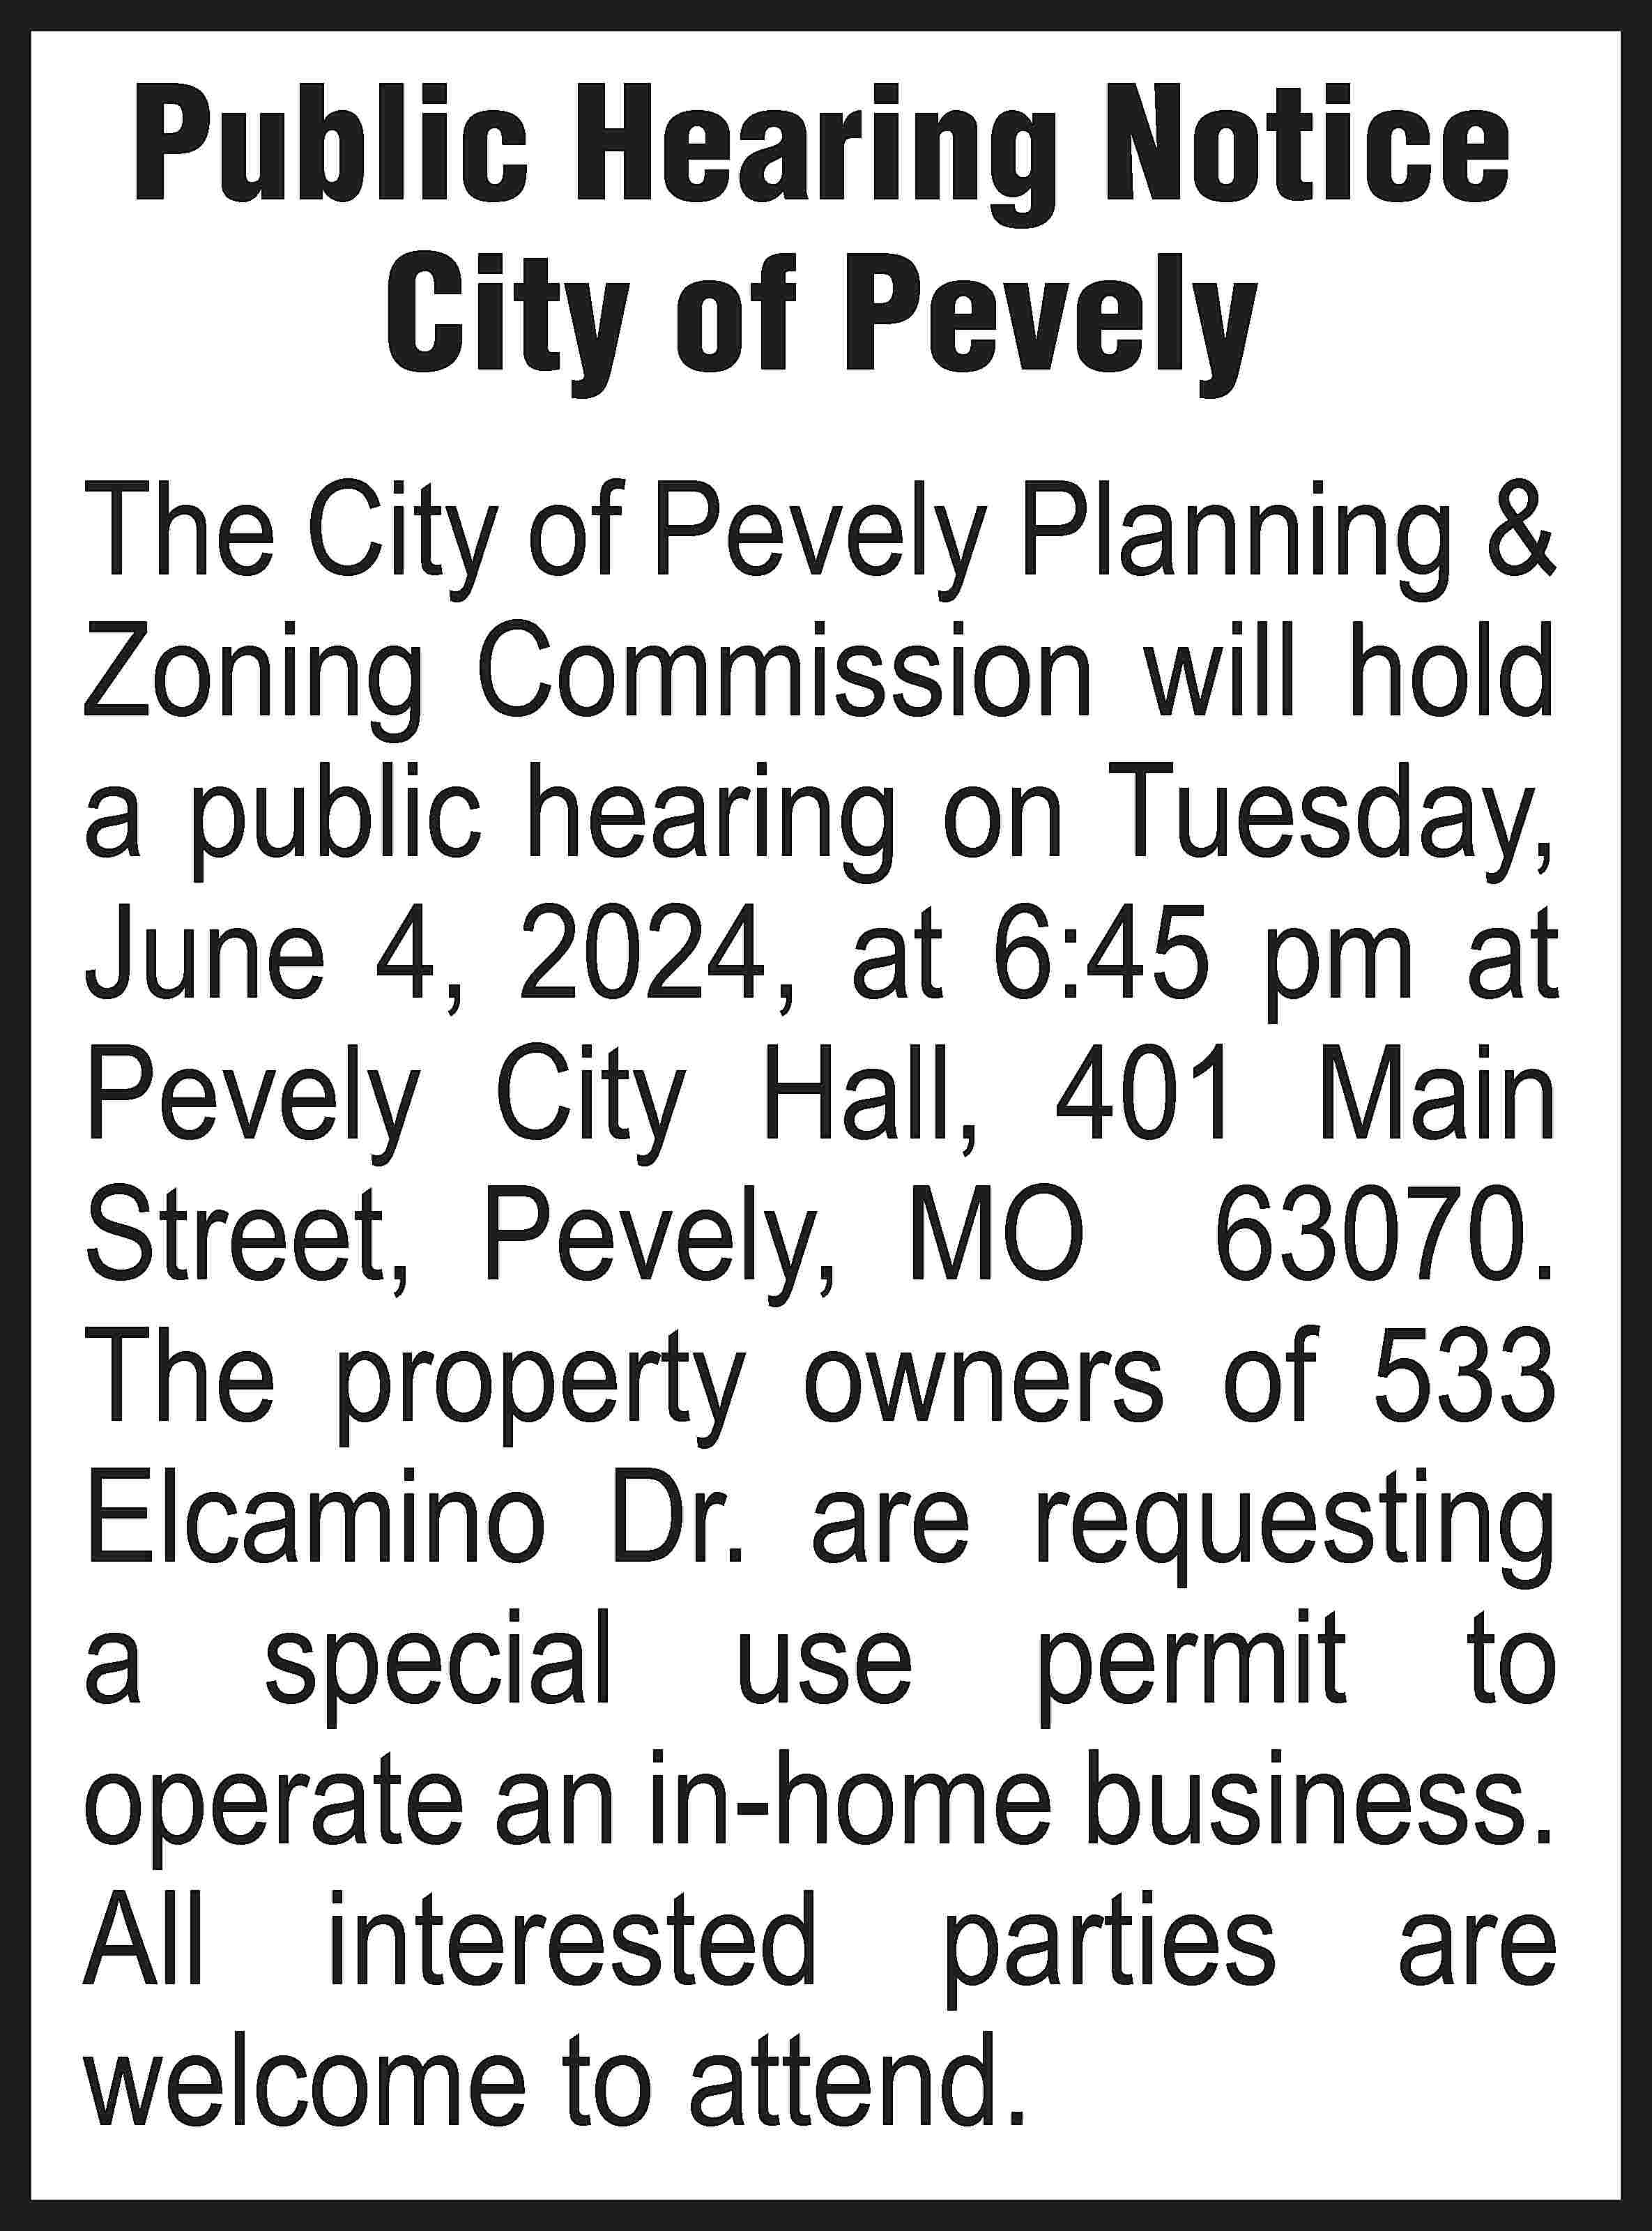 Public Hearing Notice City of  Public Hearing Notice City of Pevely The City of Pevely Planning & Zoning Commission will hold a public hearing on Tuesday, June 4, 2024, at 6:45 pm at Pevely City Hall, 401 Main Street, Pevely, MO 63070. The property owners of 533 Elcamino Dr. are requesting a special use permit to operate an in-home business. All interested parties are welcome to attend.